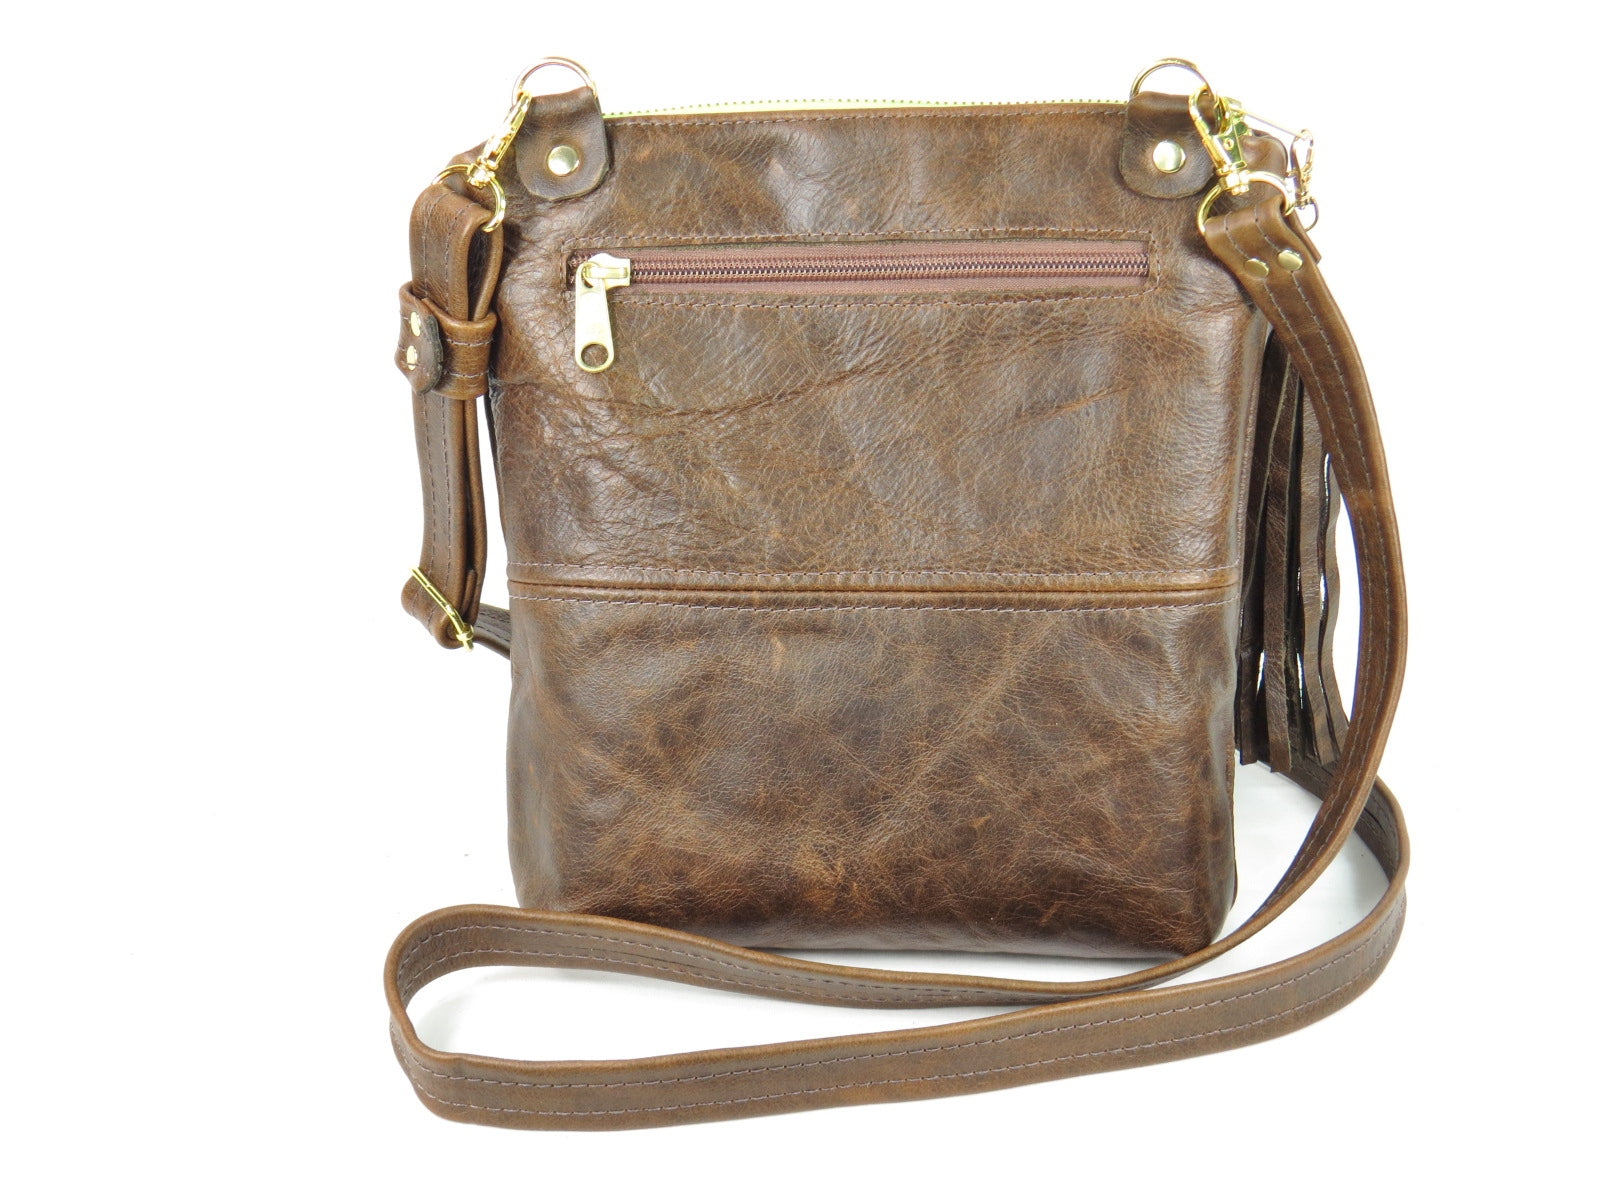 Butterfly Embroidered Chocolate Brown Leather Cross Body Handbag backside zipper pocket